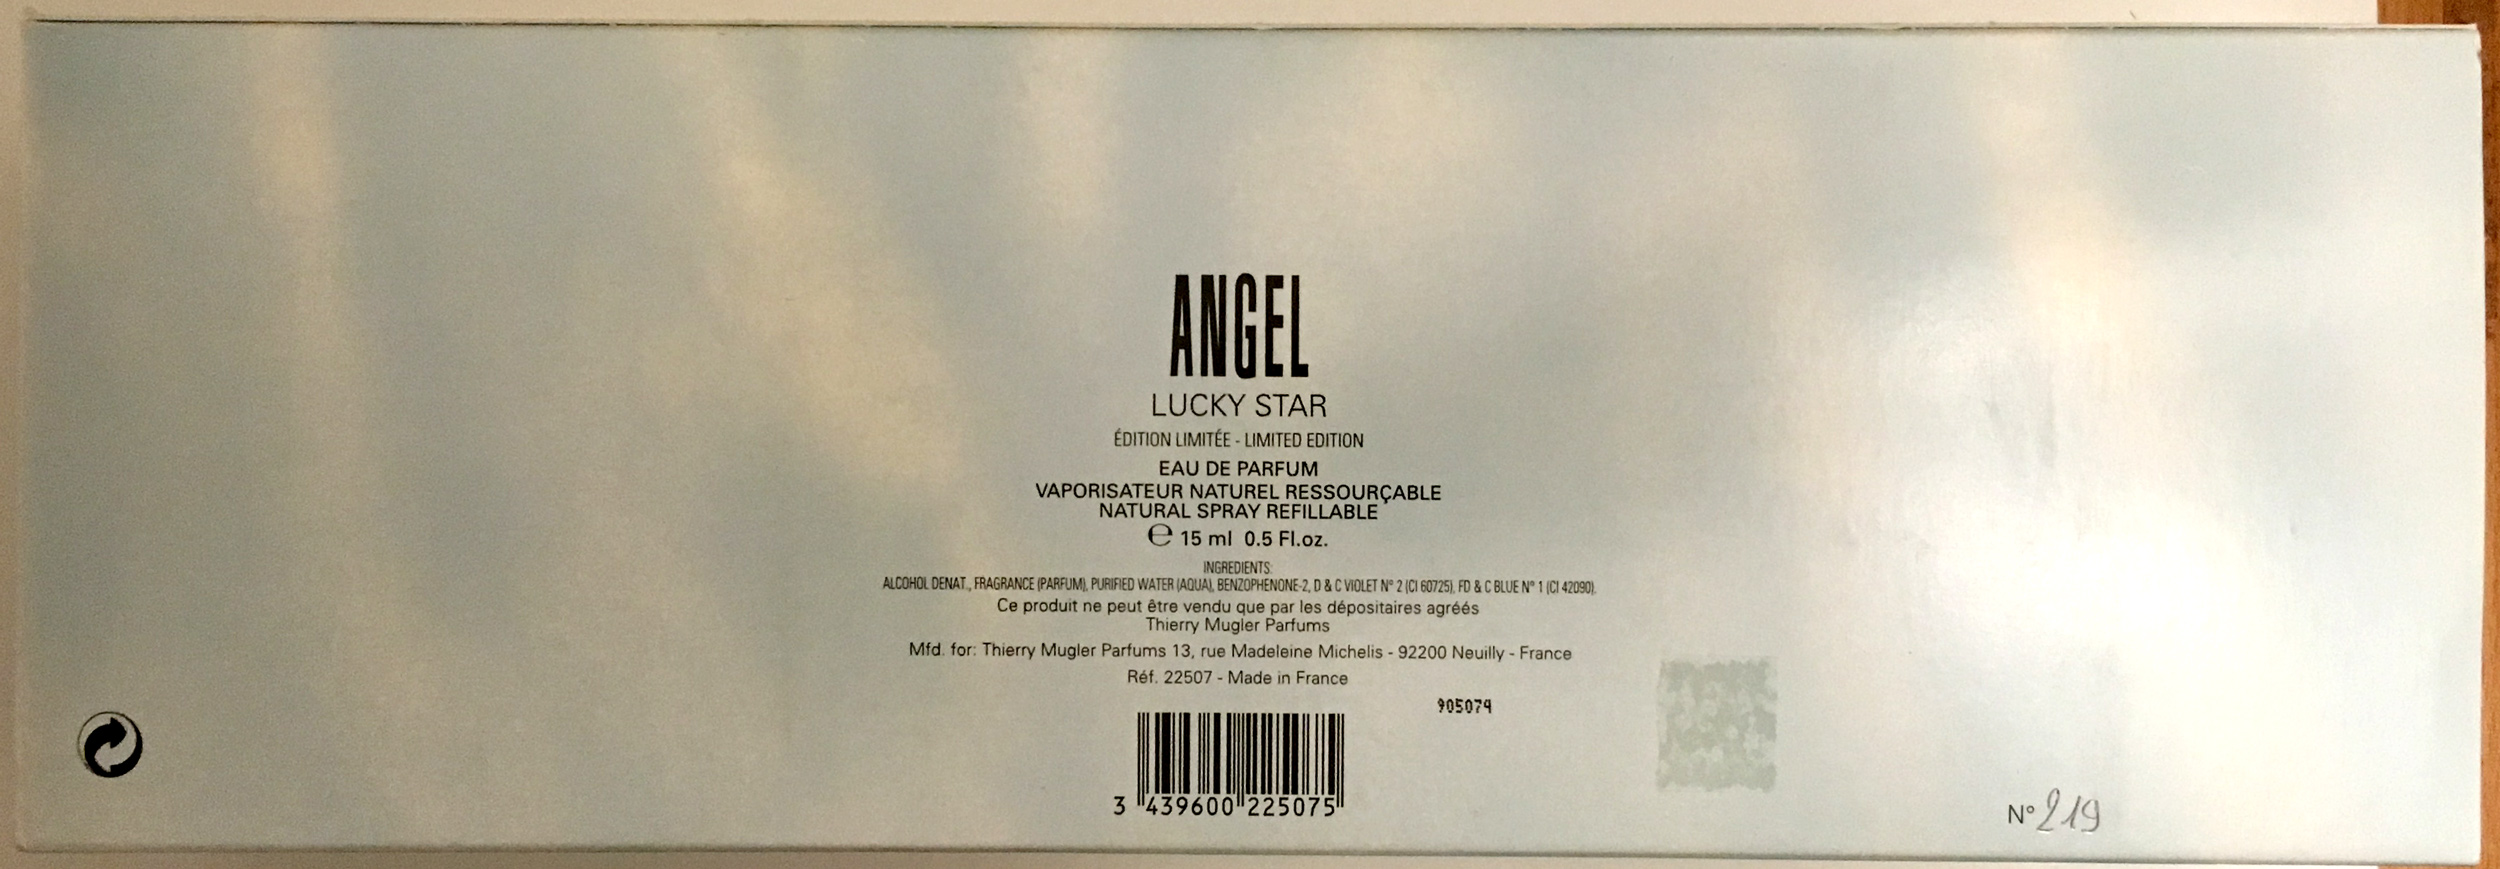 Thierry Mugler Angel Perfume Collector's Limited Edition Bottle 1999 Lucky Star BOX Numbered